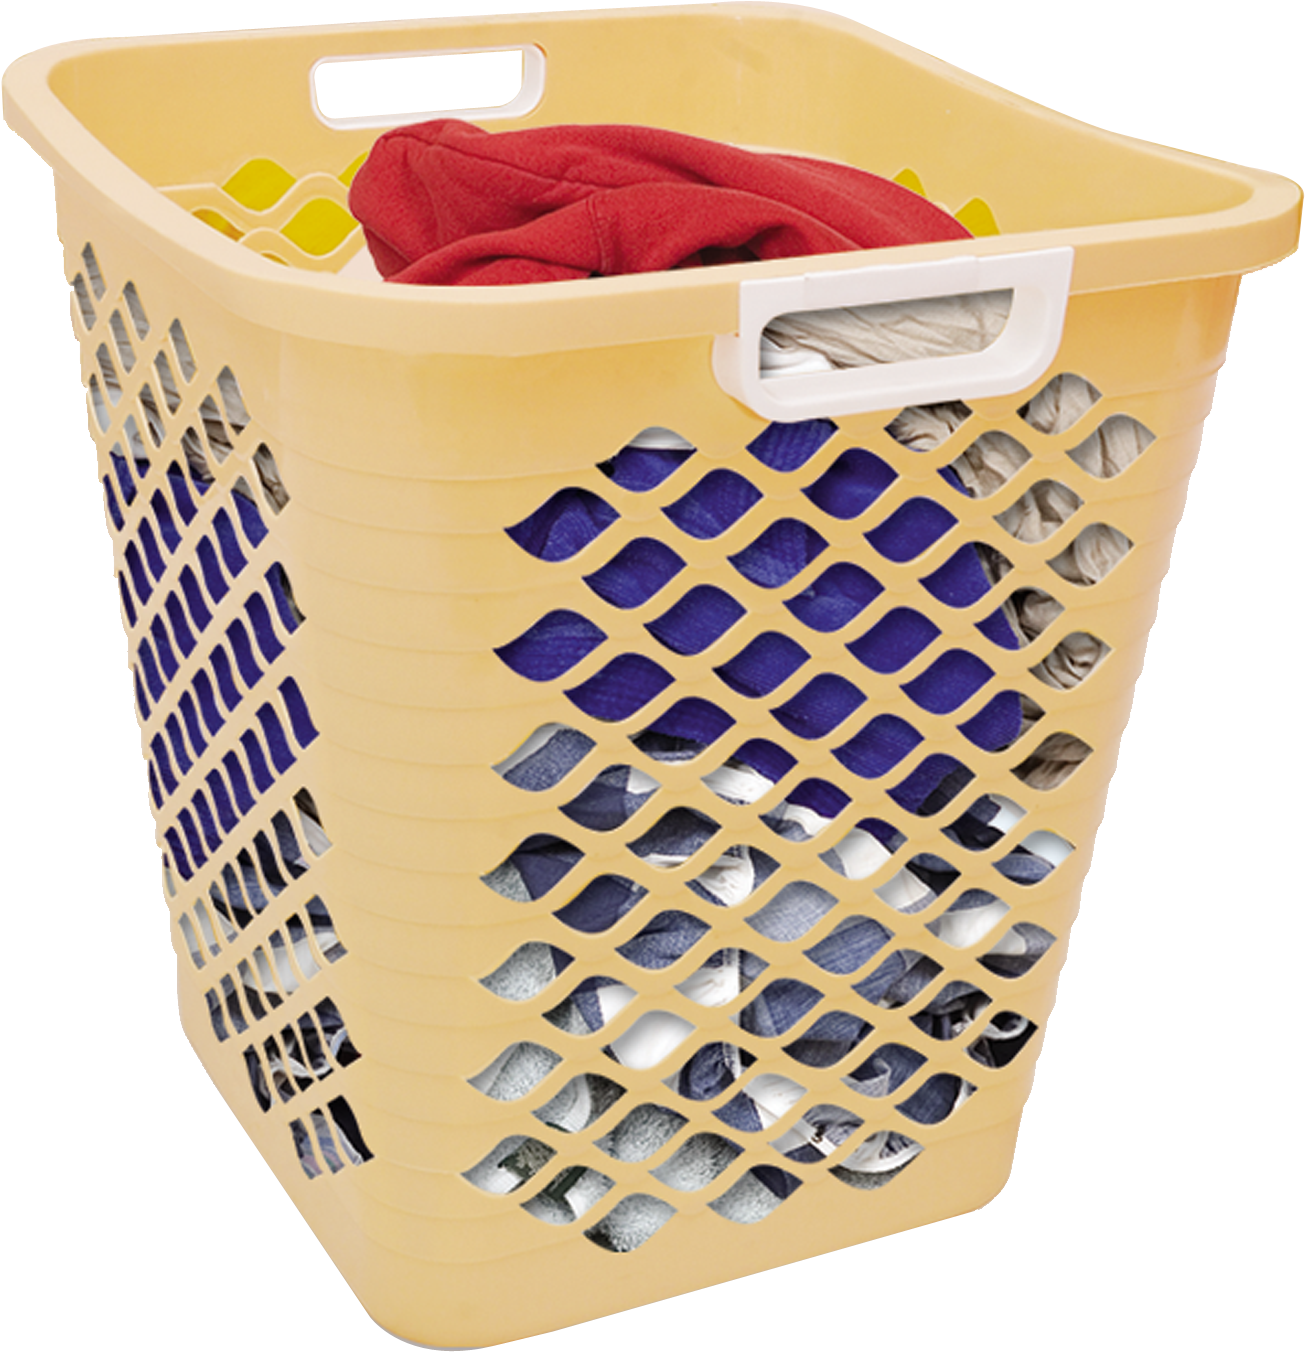 A Yellow Laundry Basket With Clothes In It